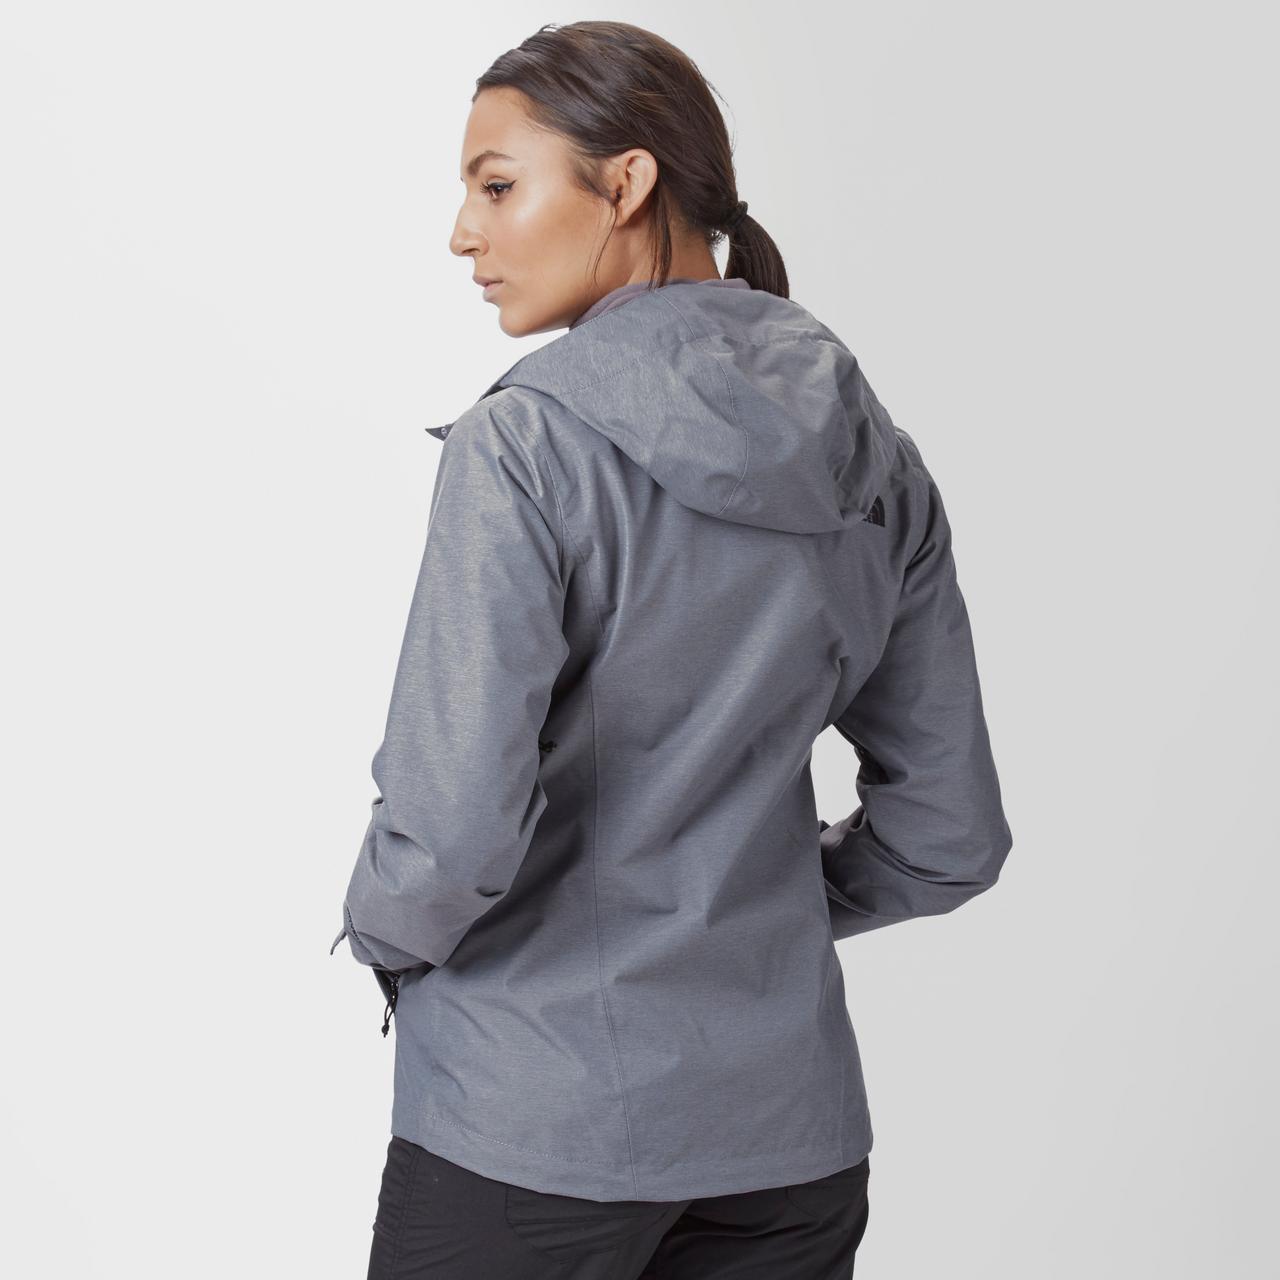 The North Face Women’s Venture 2 DryVent® Jacket The North Face ktmart 2